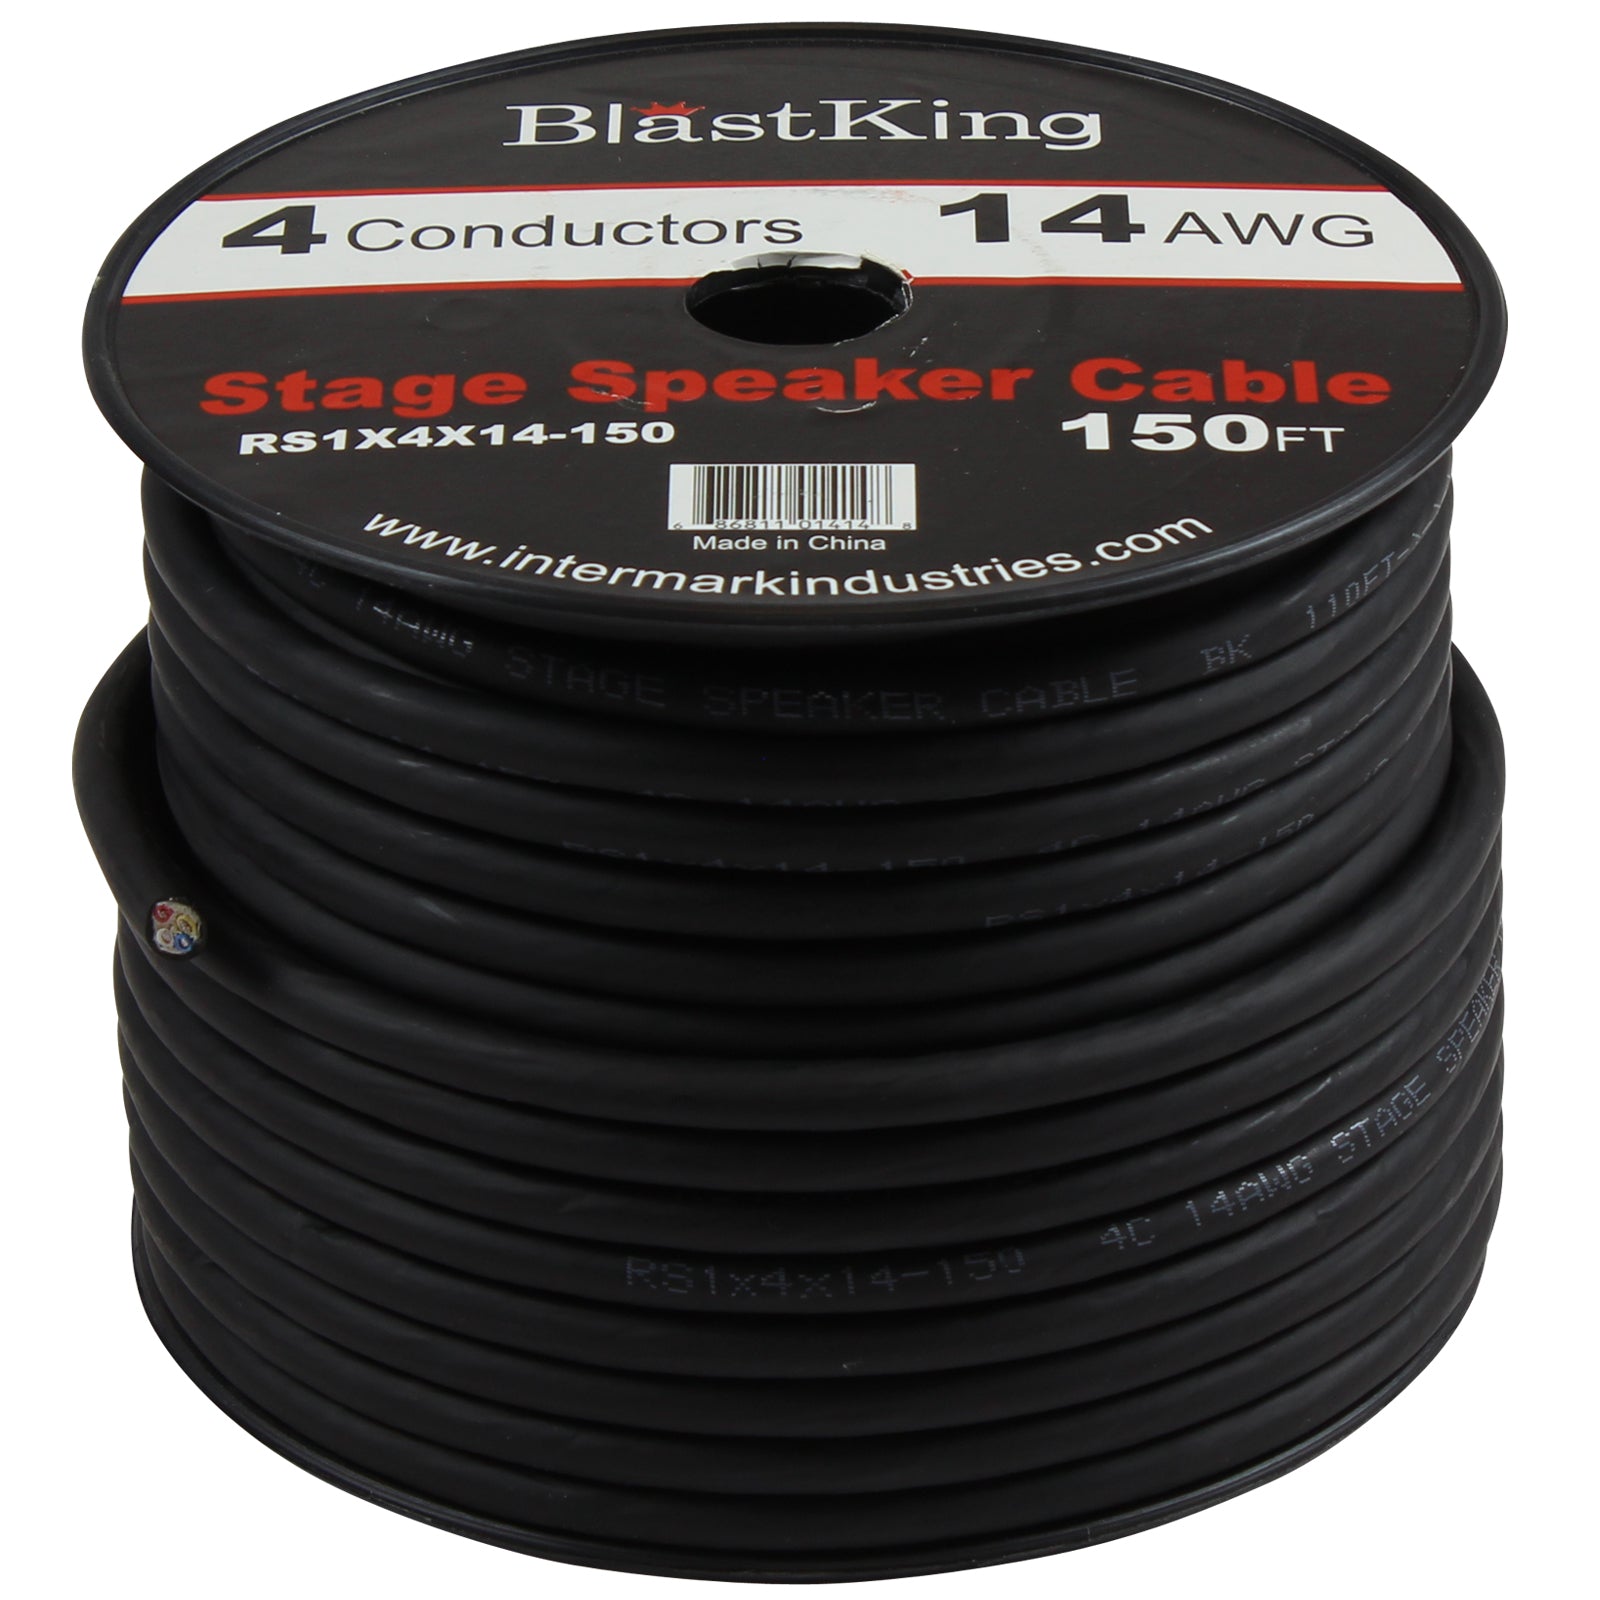 Blastking RS1X4X14-150 14 AWG 4-Conductor Speaker Cable 150 Ft